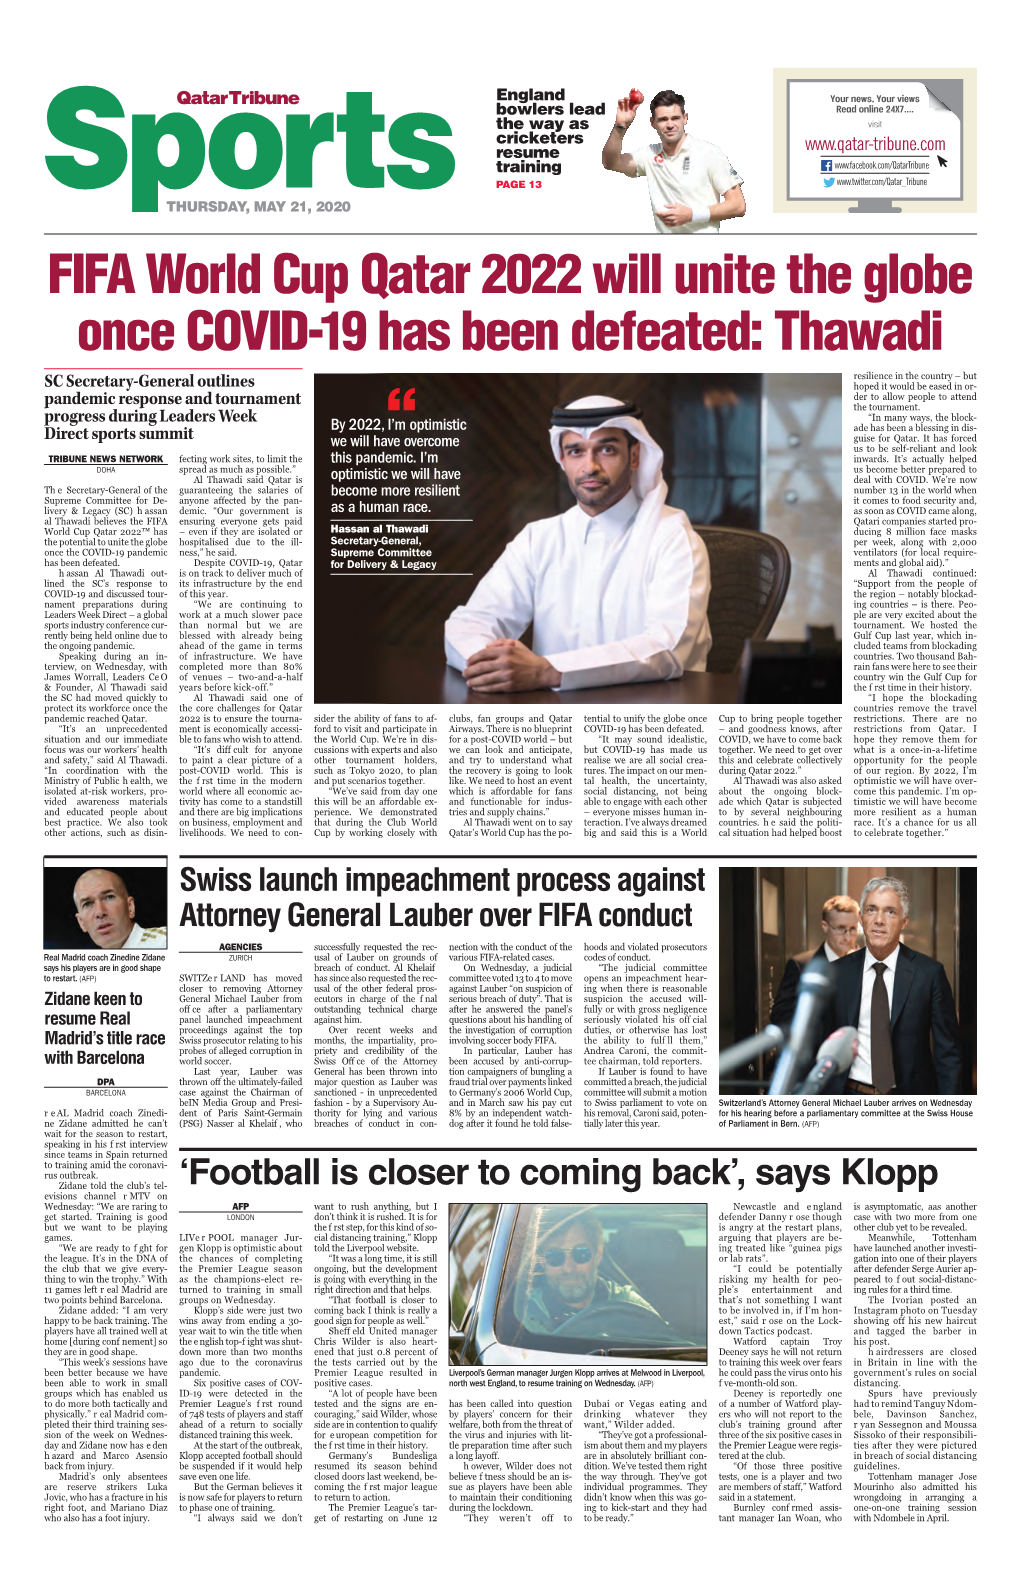 FIFA World Cup Qatar 2022 Will Unite the Globe Once COVID-19 Has Been